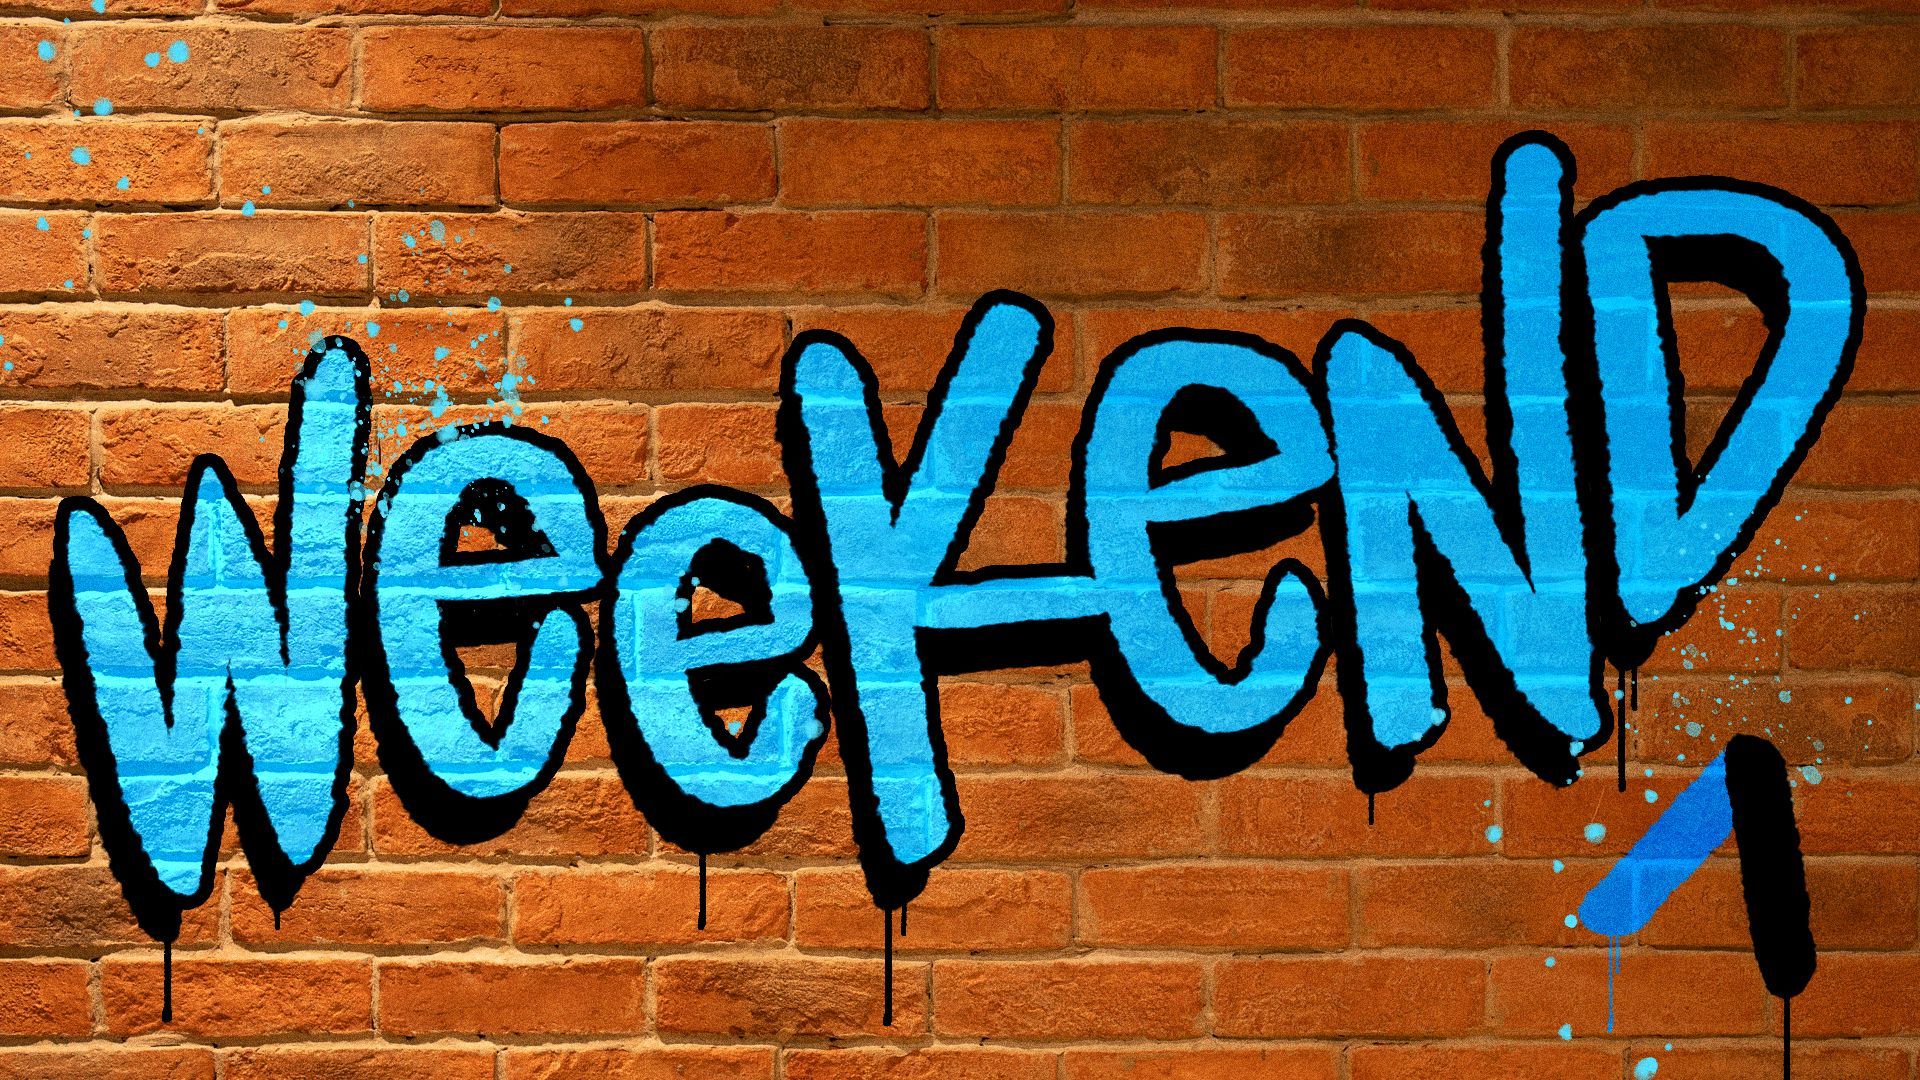 Illustration of "Weekend" in graffiti on a brick wall. 